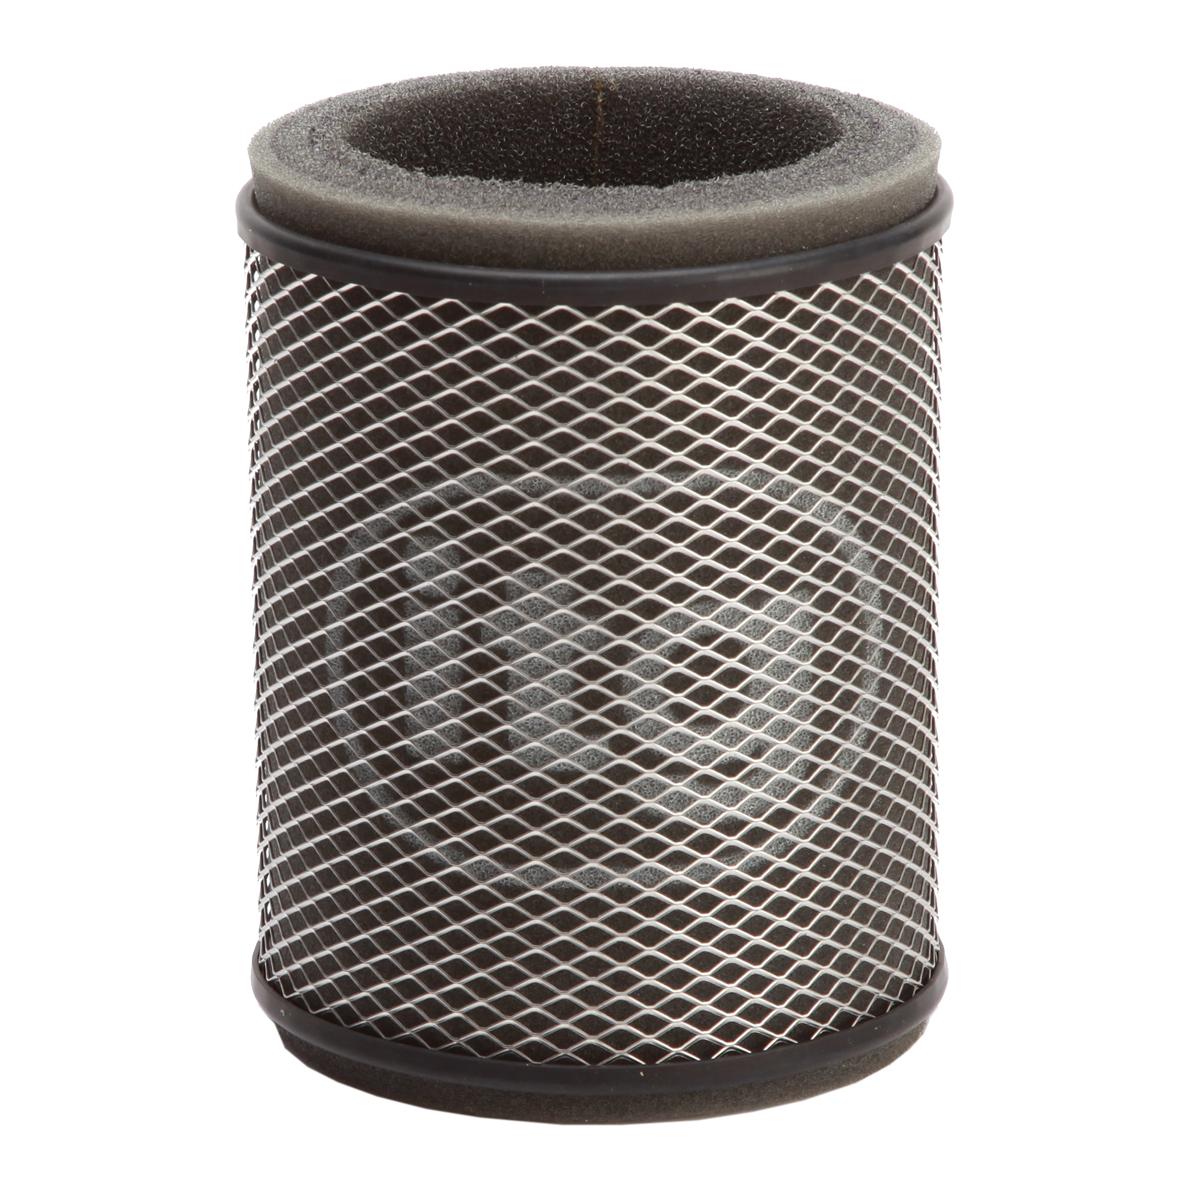 ITG Air Filter For Rover 820I (07/86>10/91)